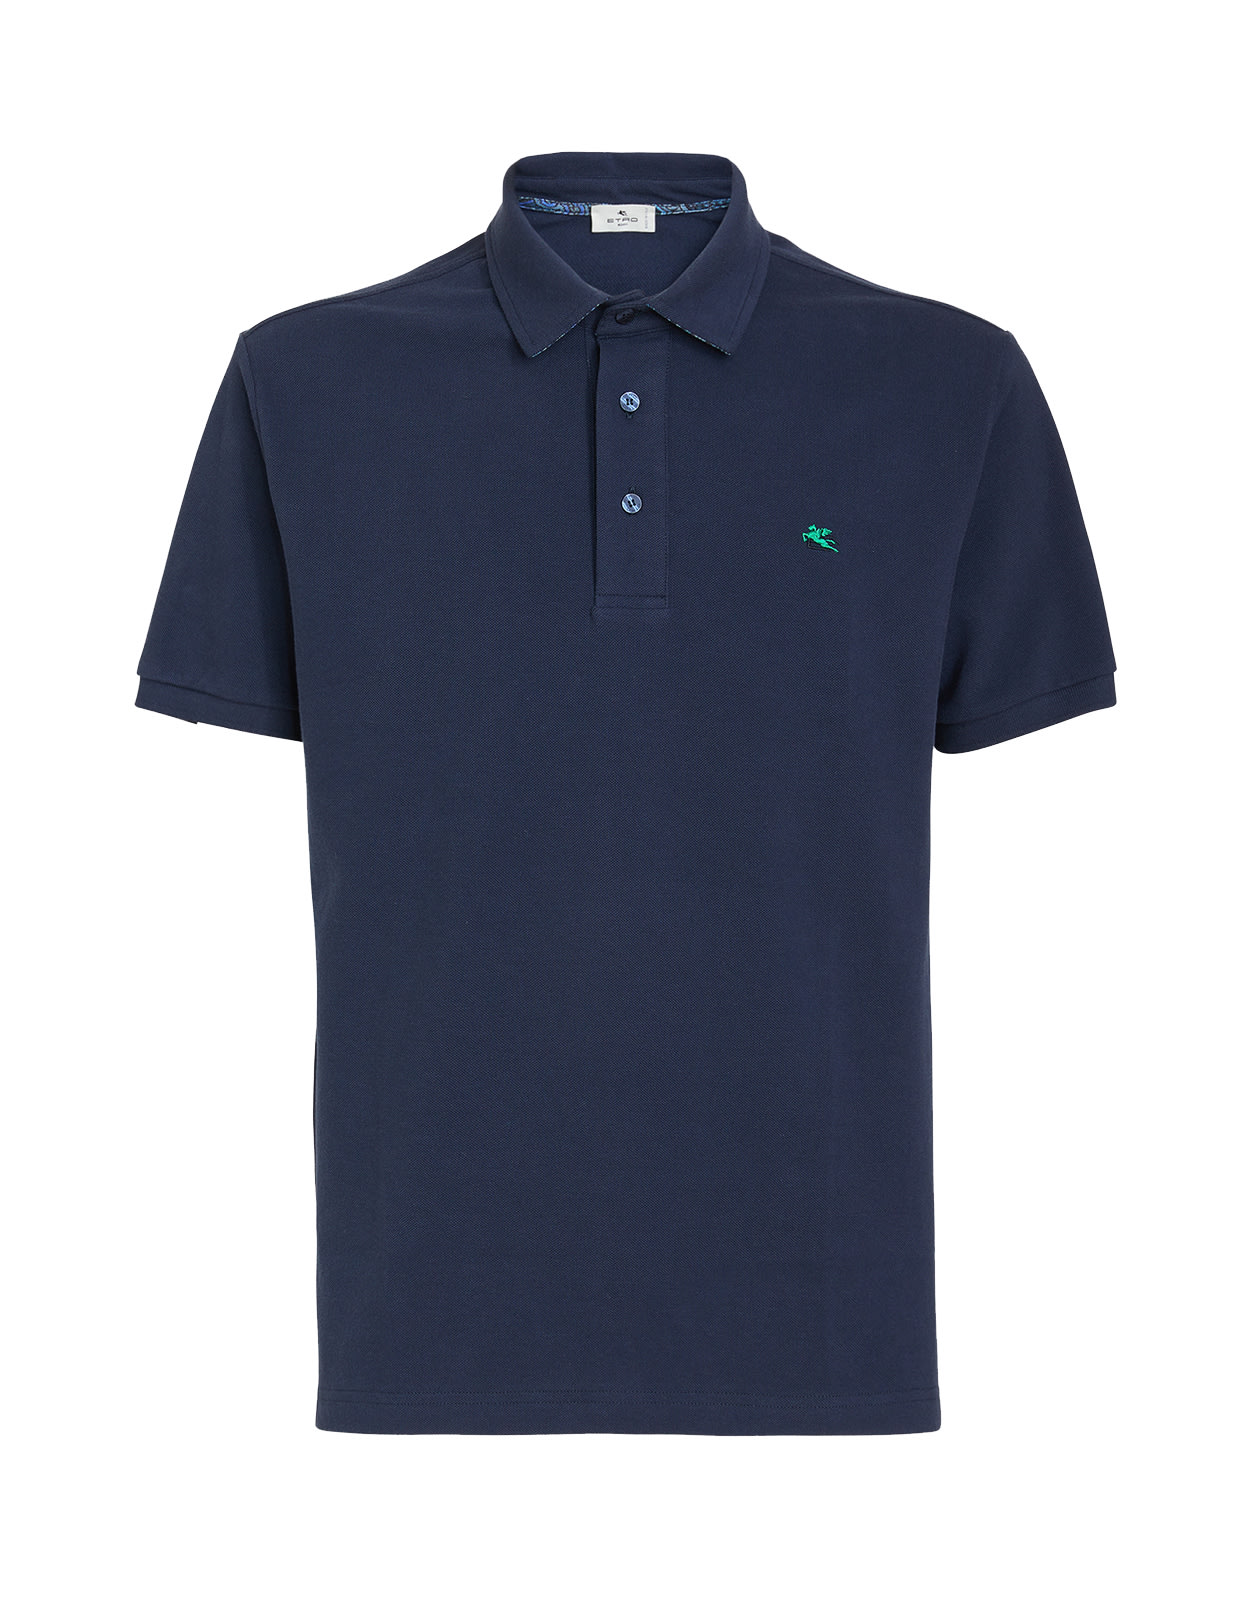 Etro Man Navy Blue Pique Polo With Contrast Embroidered Pegasus